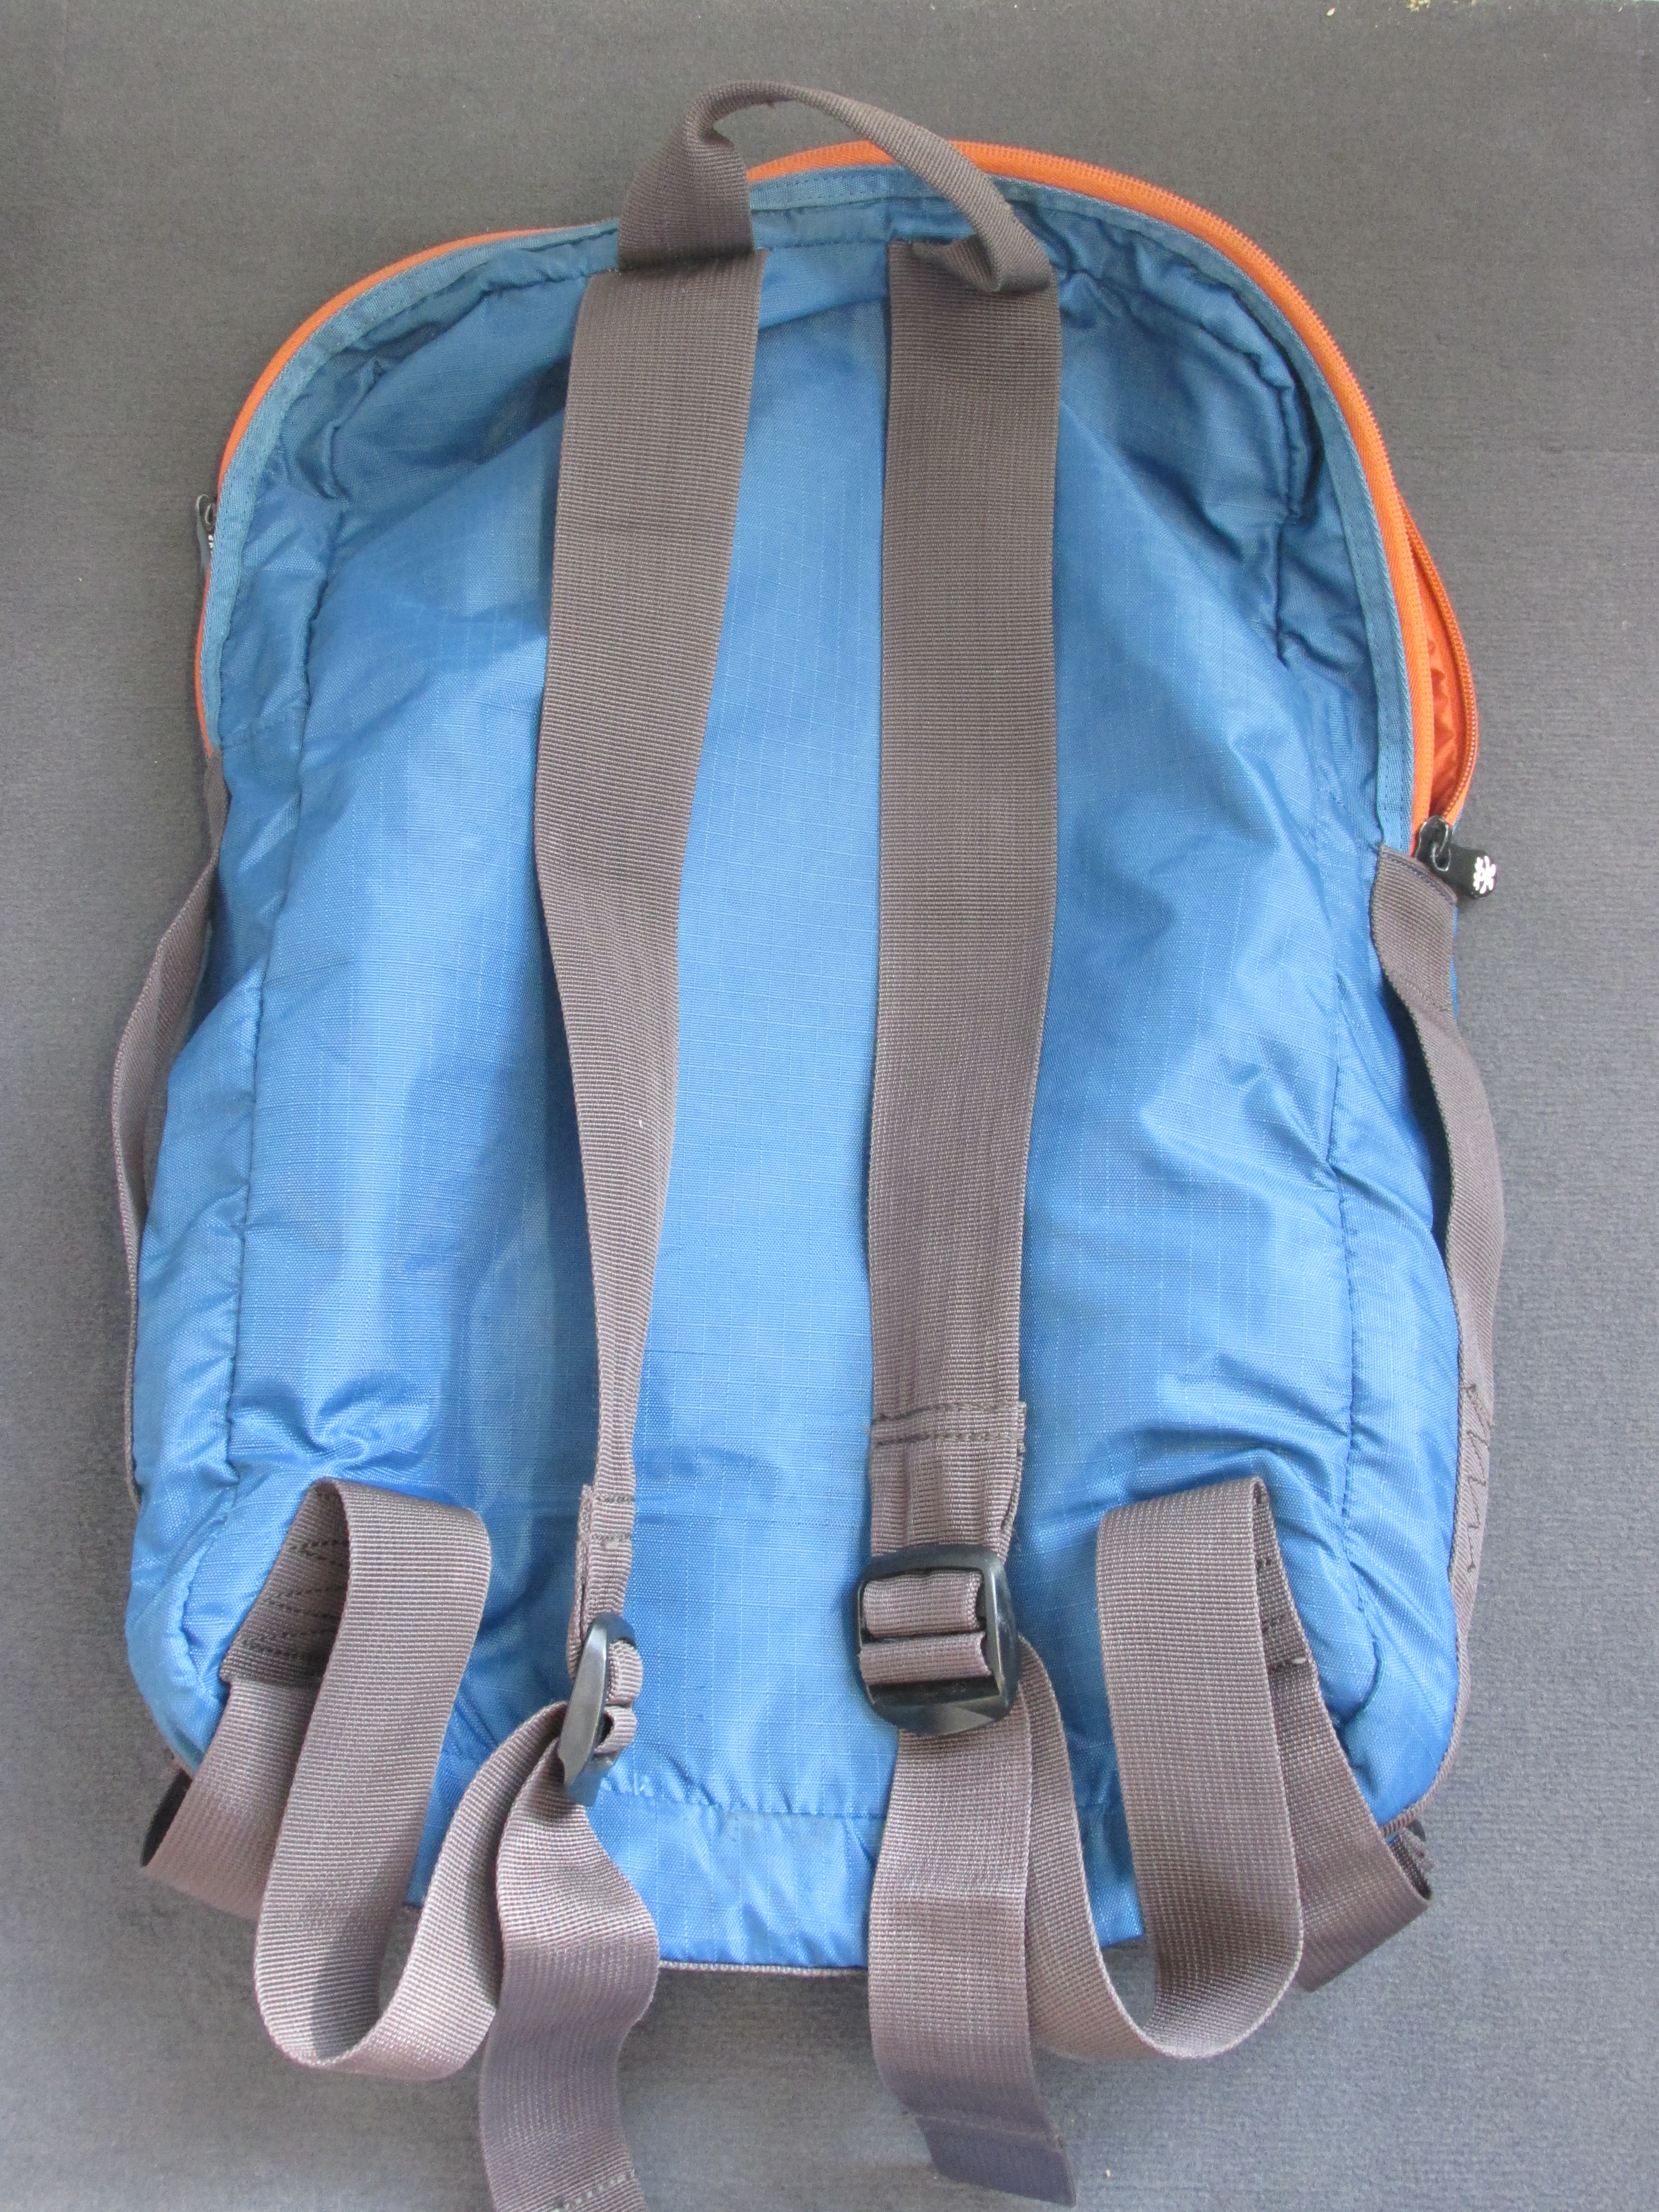 Used: Crumpler Light Delight Backpack review